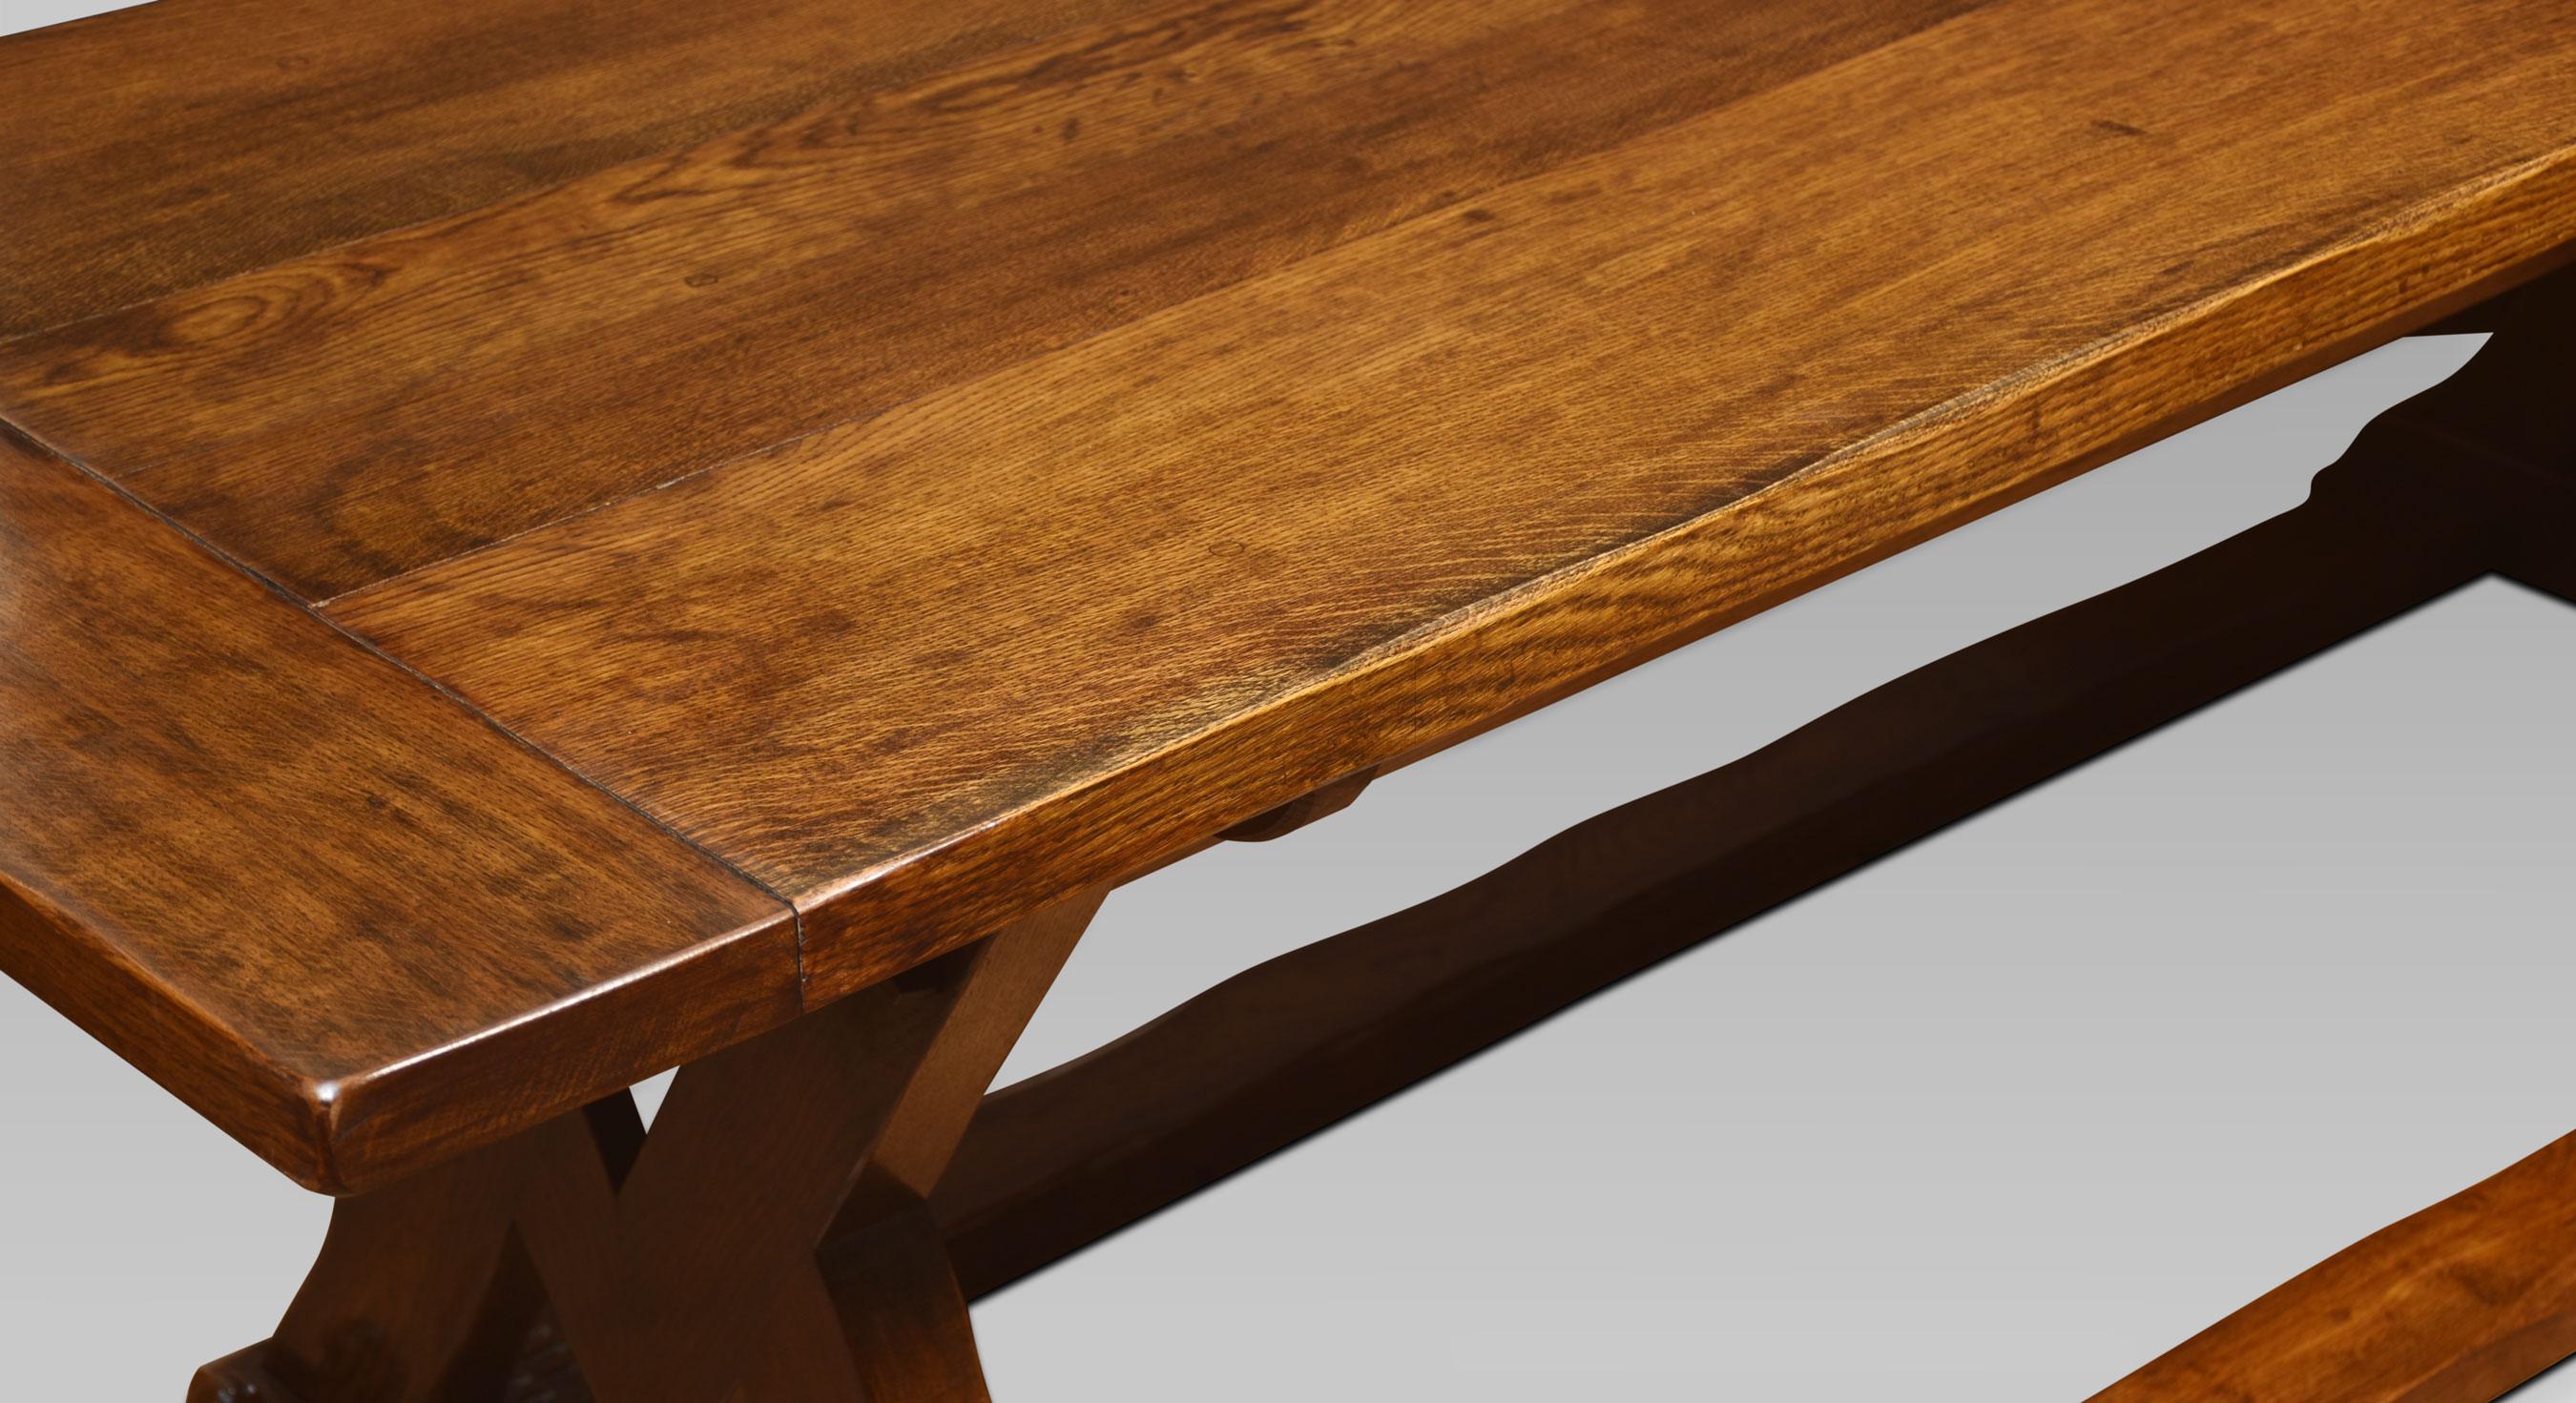 Large oak refectory table, the thick top with cleated ends raised up on square and compass slab ends united by stretchers.
Dimensions
Height 30 Inches
Width 100 Inches
Depth 32.5 Inches.